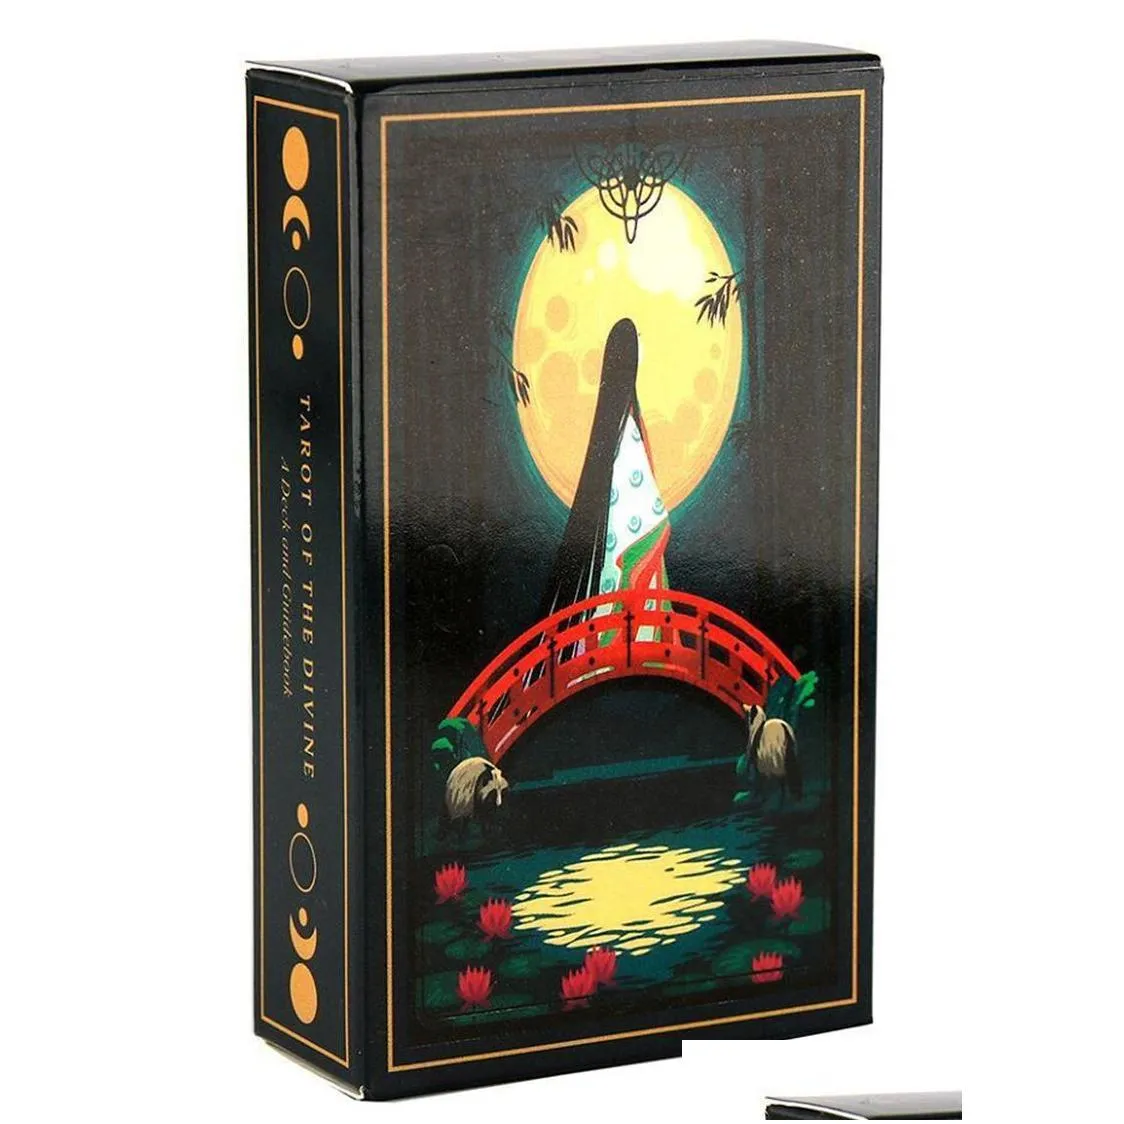 tarot card games linestrider dreams toy divination star spinner muse hoodoo occult ridetarot del fuego cards tarots deck oracles e-guidebook game dhs